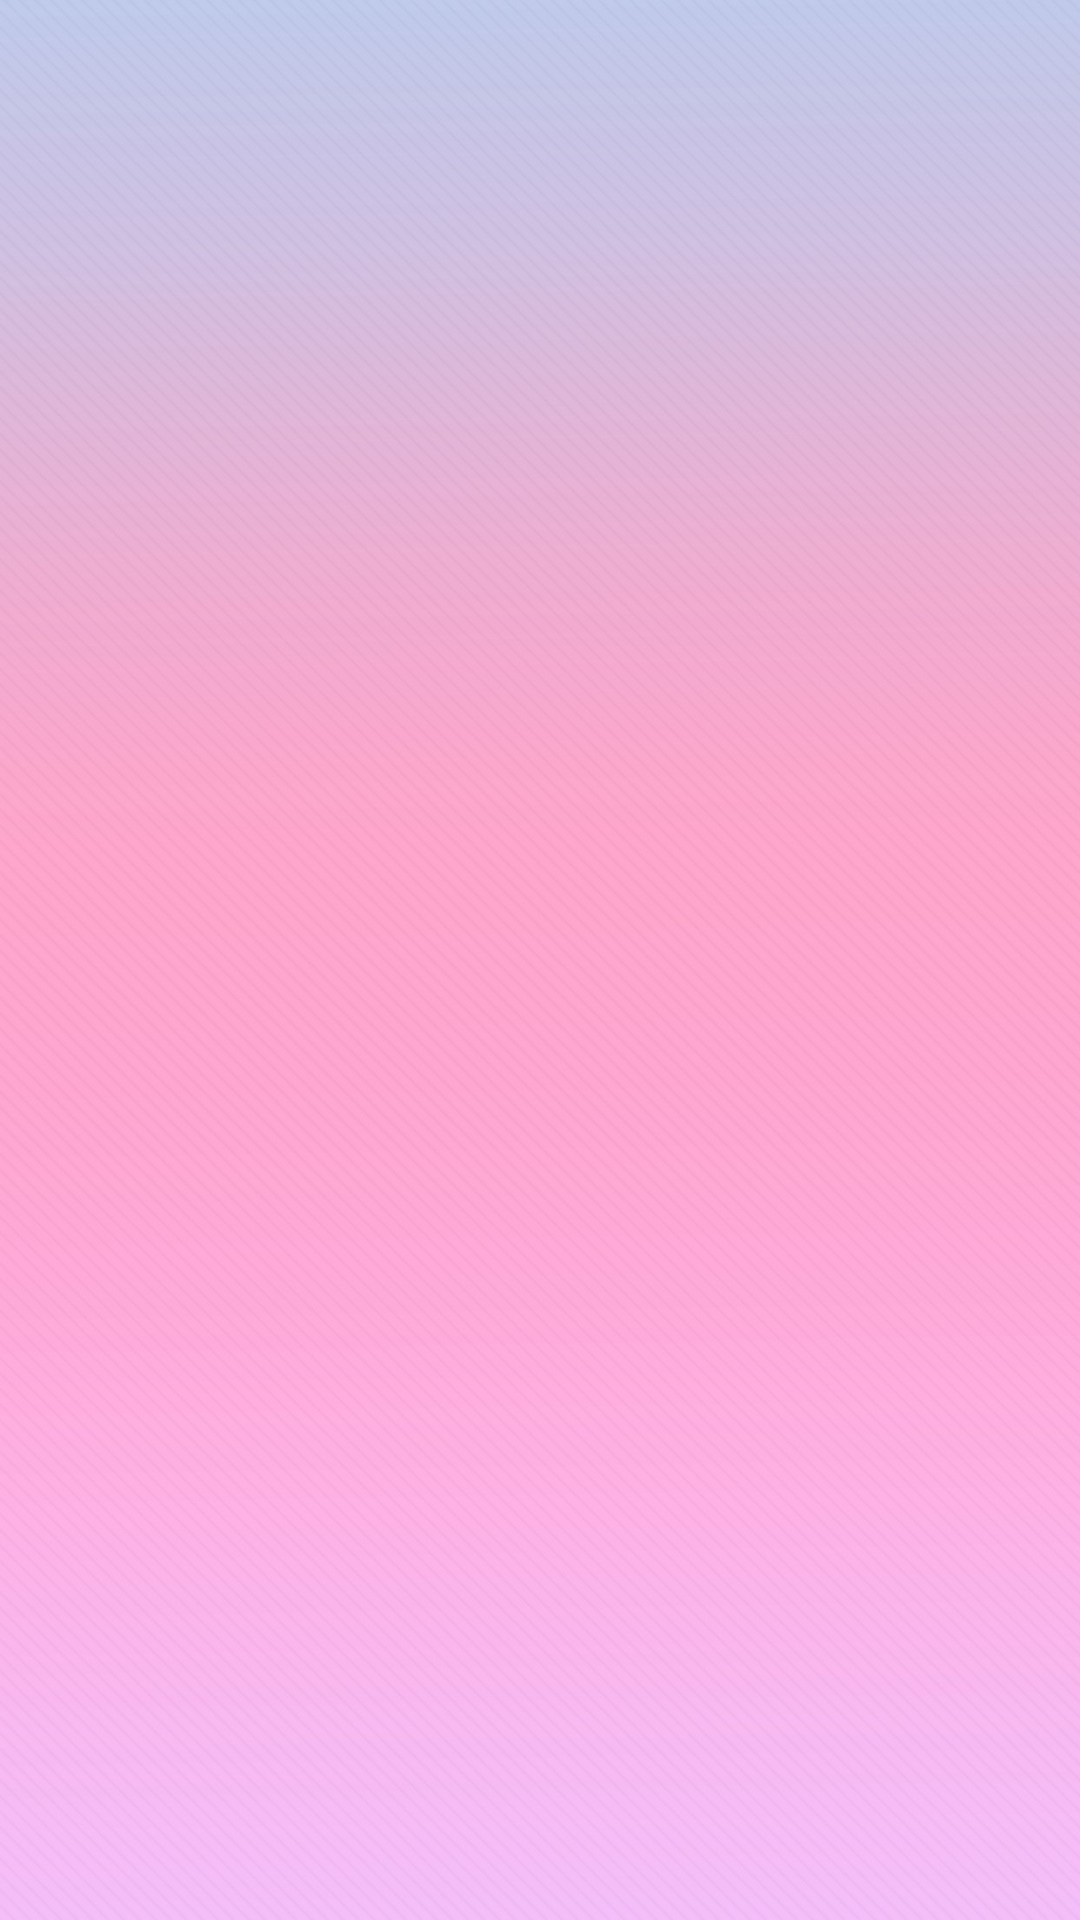 Gradient iPhone Wallpaper with high-resolution 1080x1920 pixel. You can set as wallpaper for Apple iPhone X, XS Max, XR, 8, 7, 6, SE, iPad. Enjoy and share your favorite HD wallpapers and background images